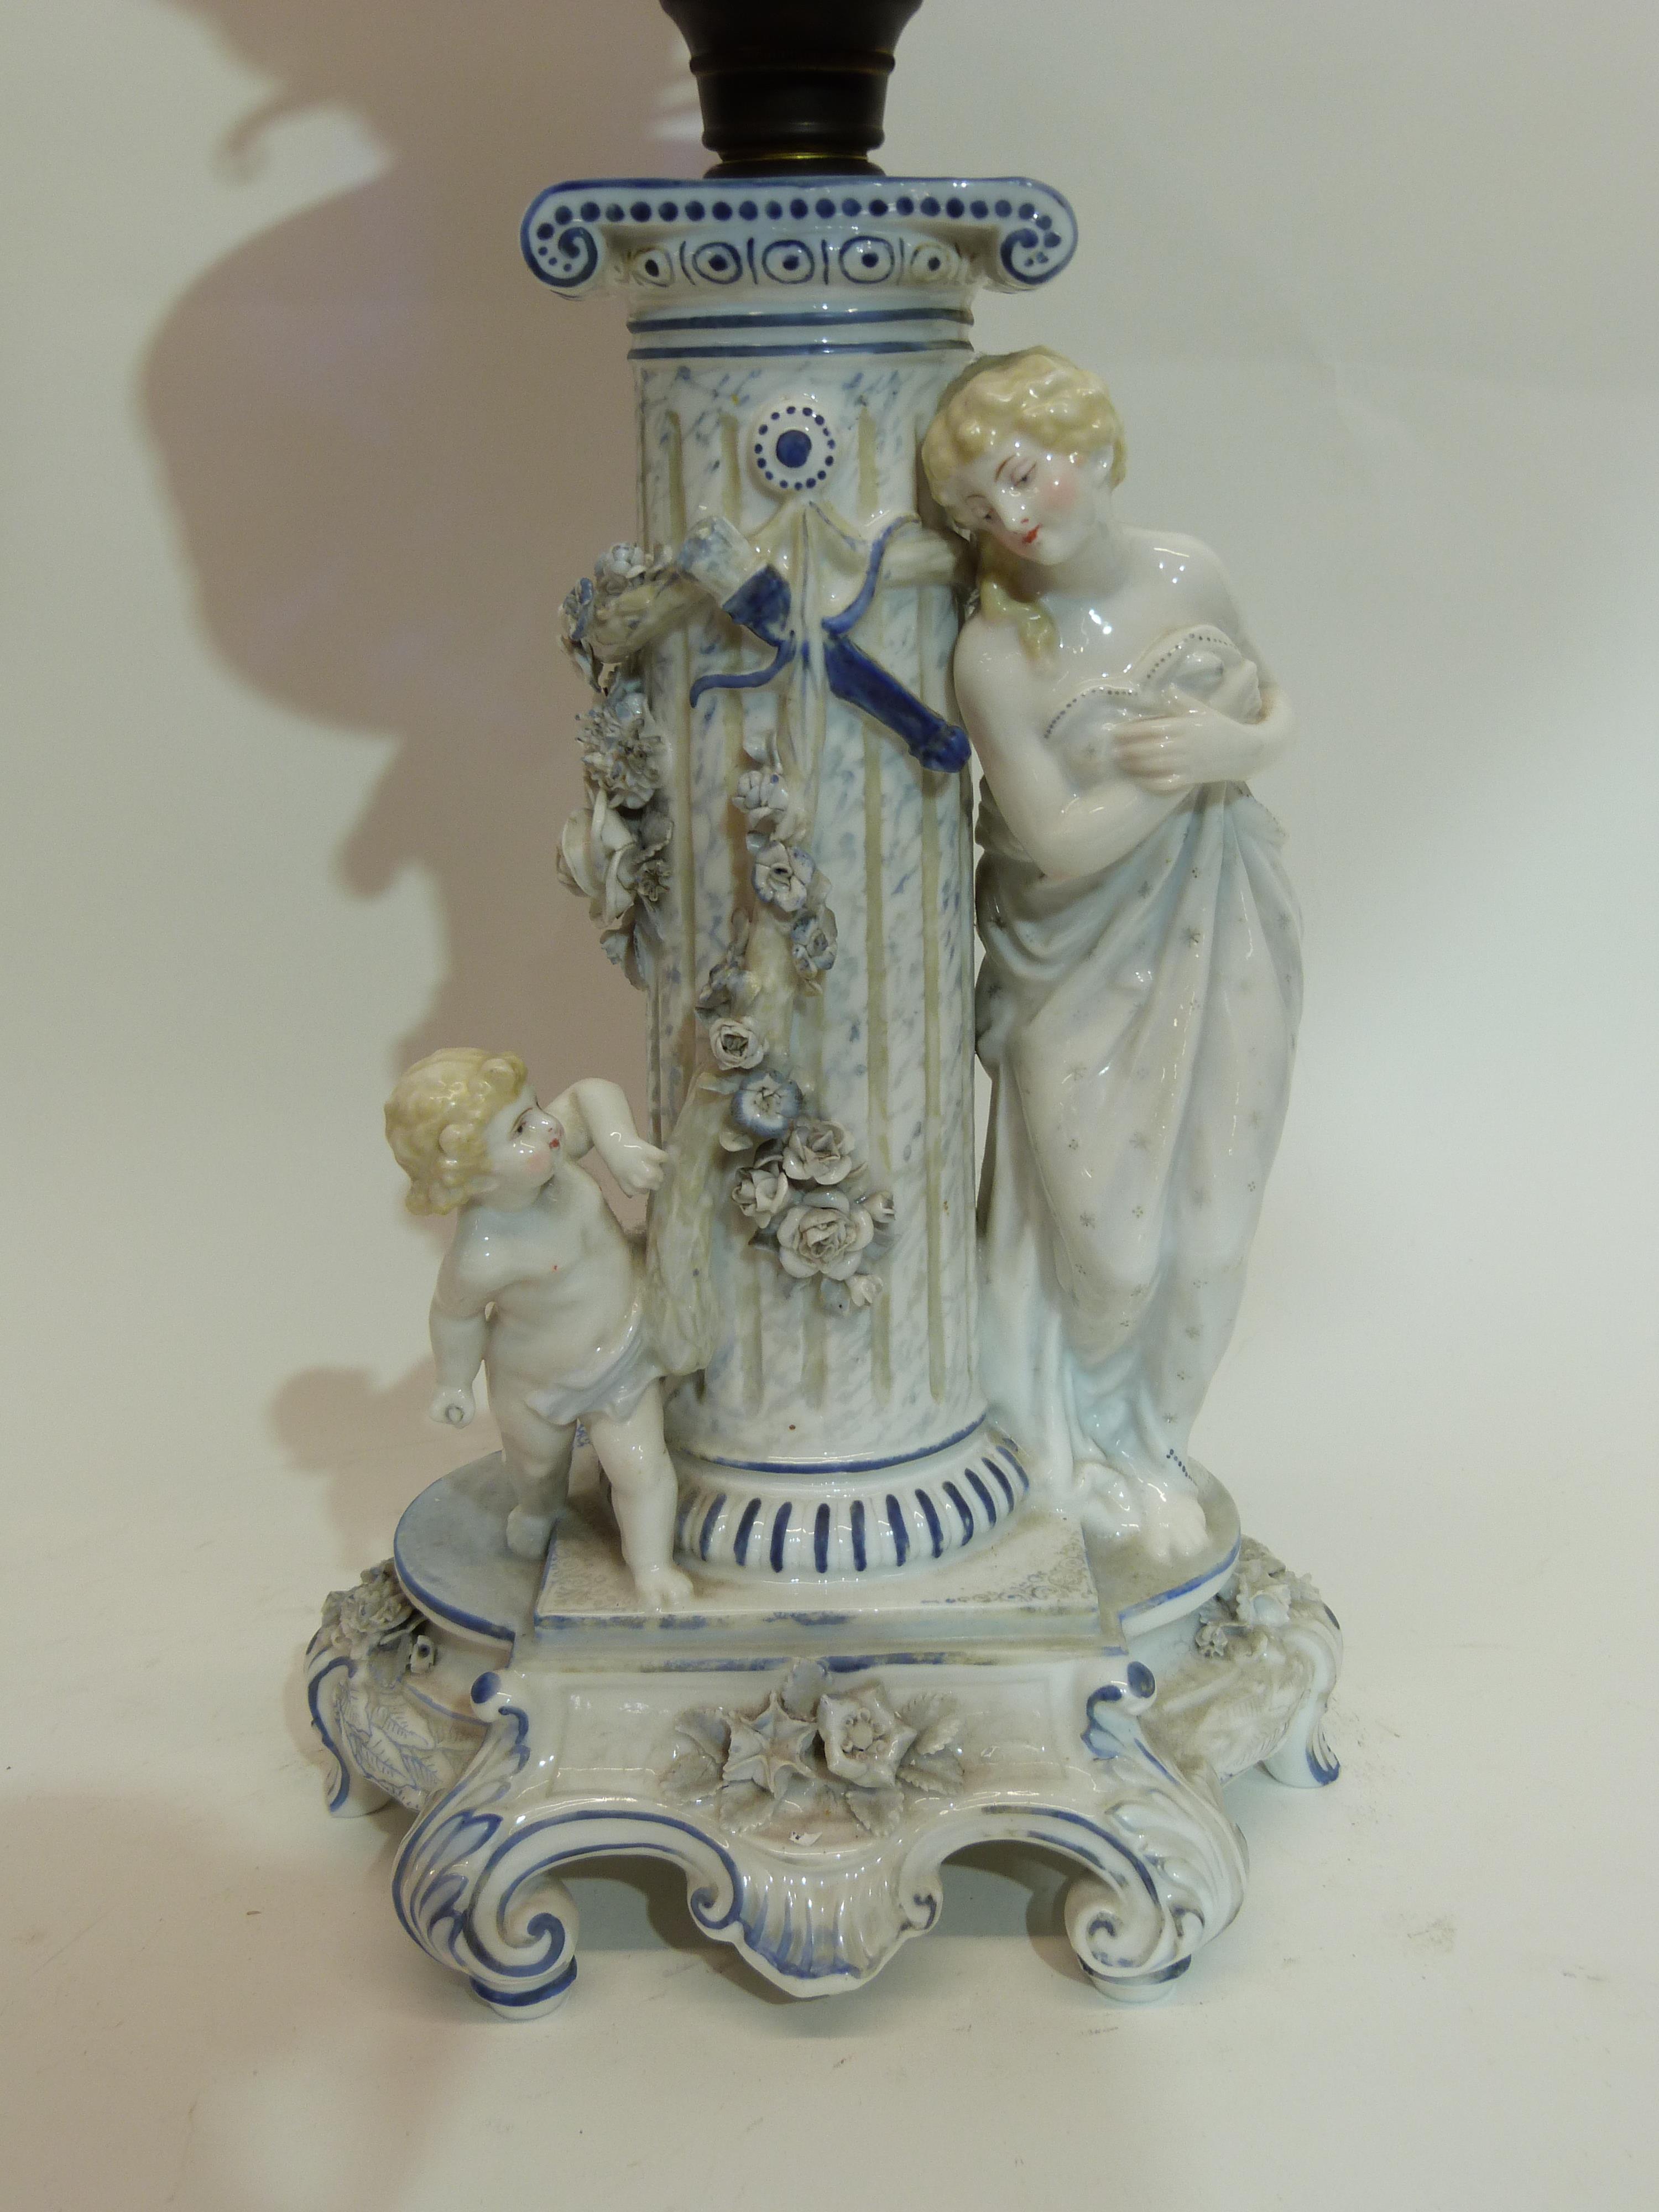 Oil lamp with blue glass reservoir below a white glass floral shade, supported by a porcelain column - Image 2 of 3